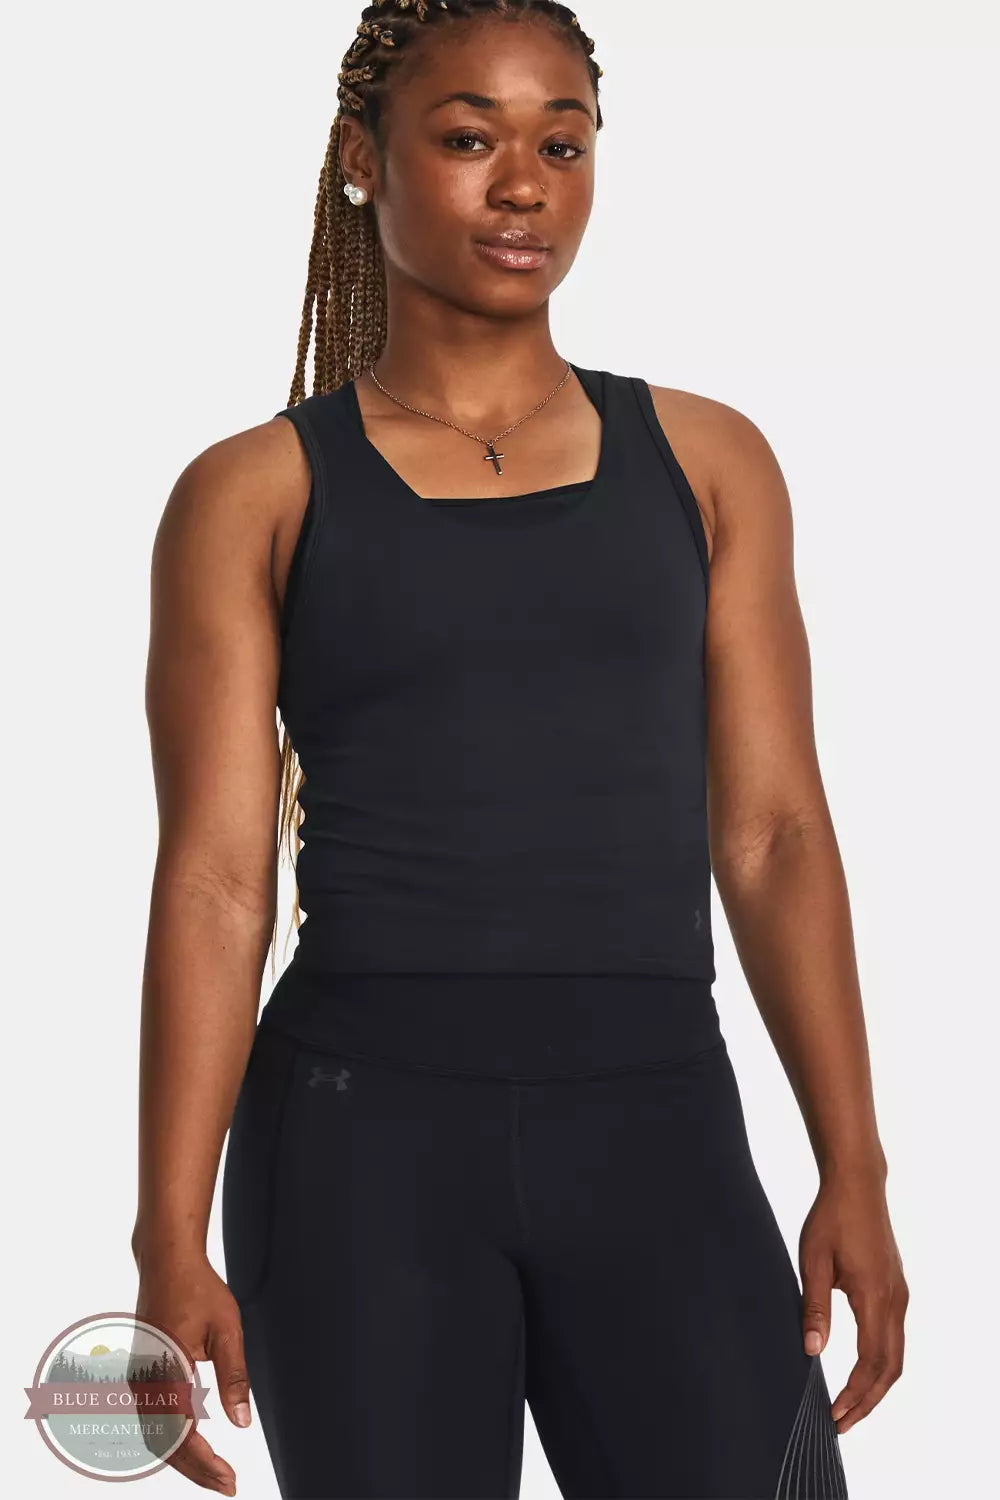 Under Armour 1379046 Motion Tank Top Black Front View